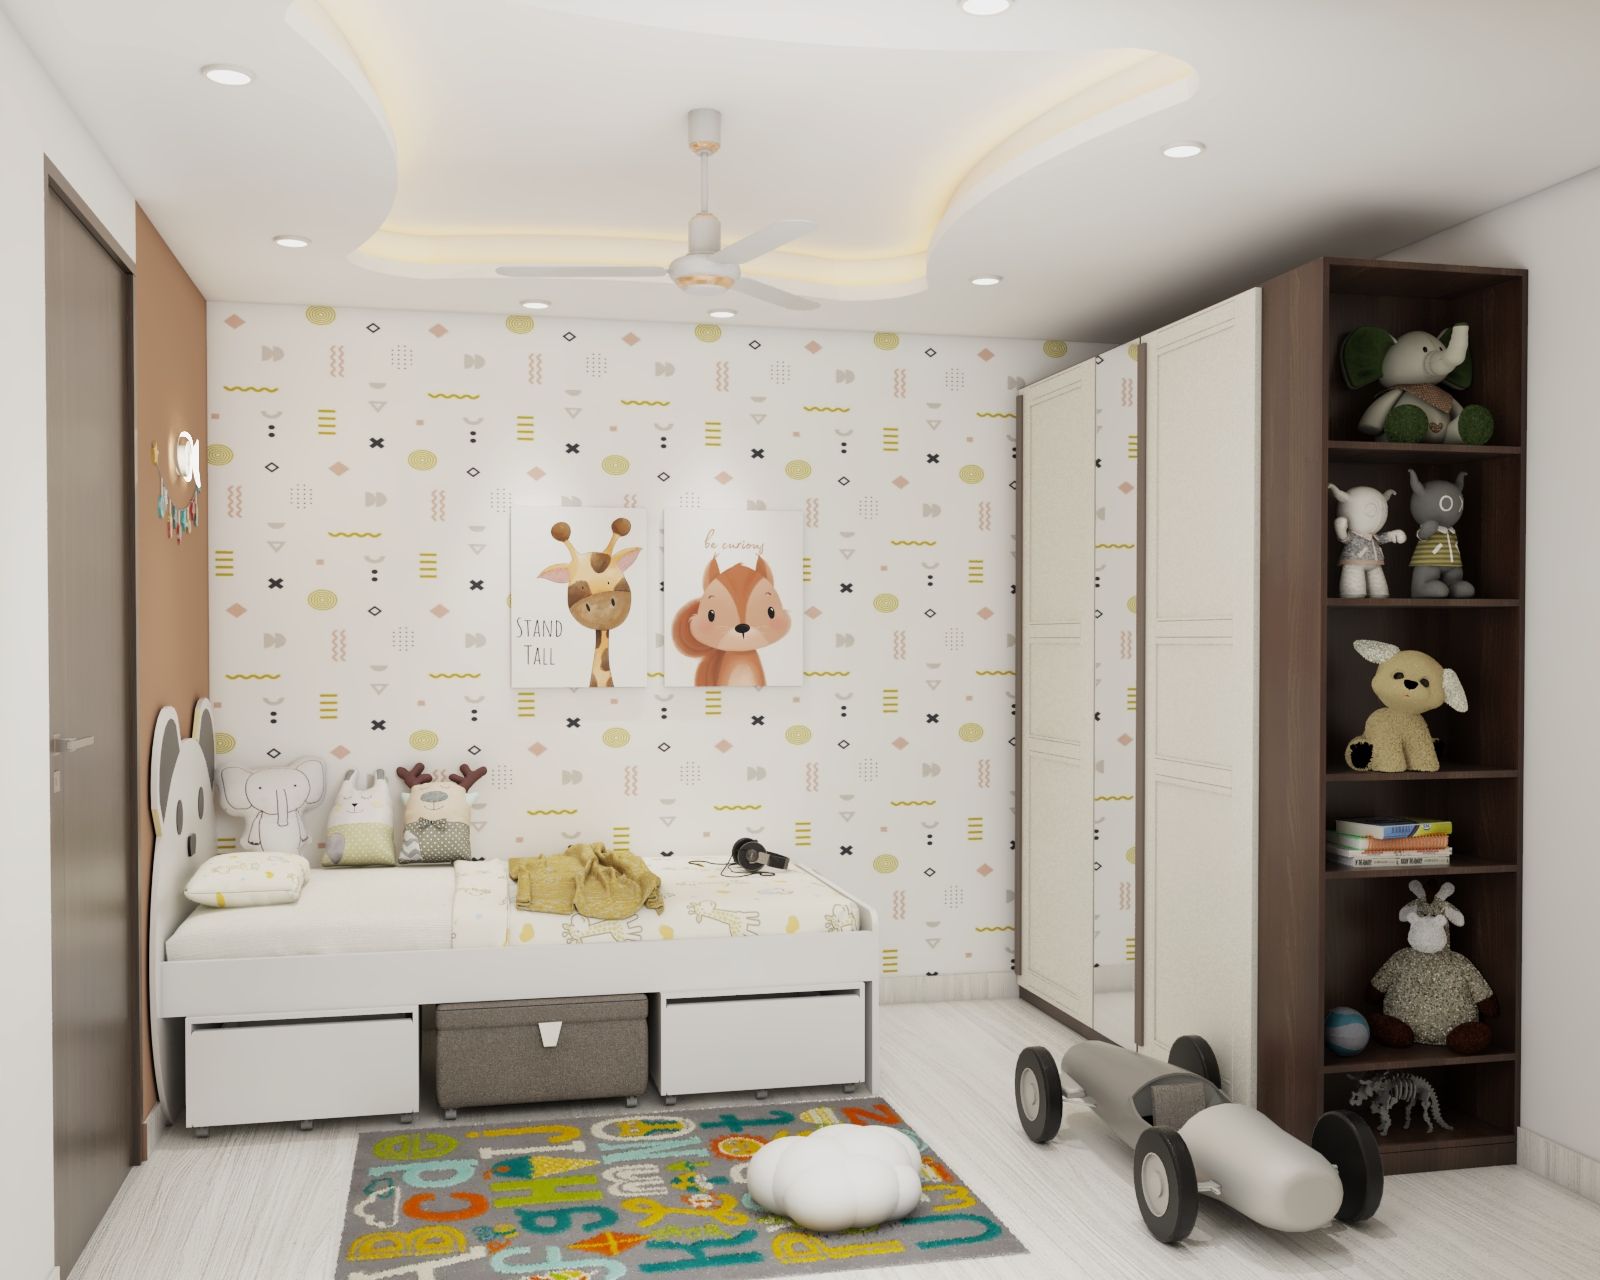 Modern Kids Room Design With A Single Bed And Open Storage